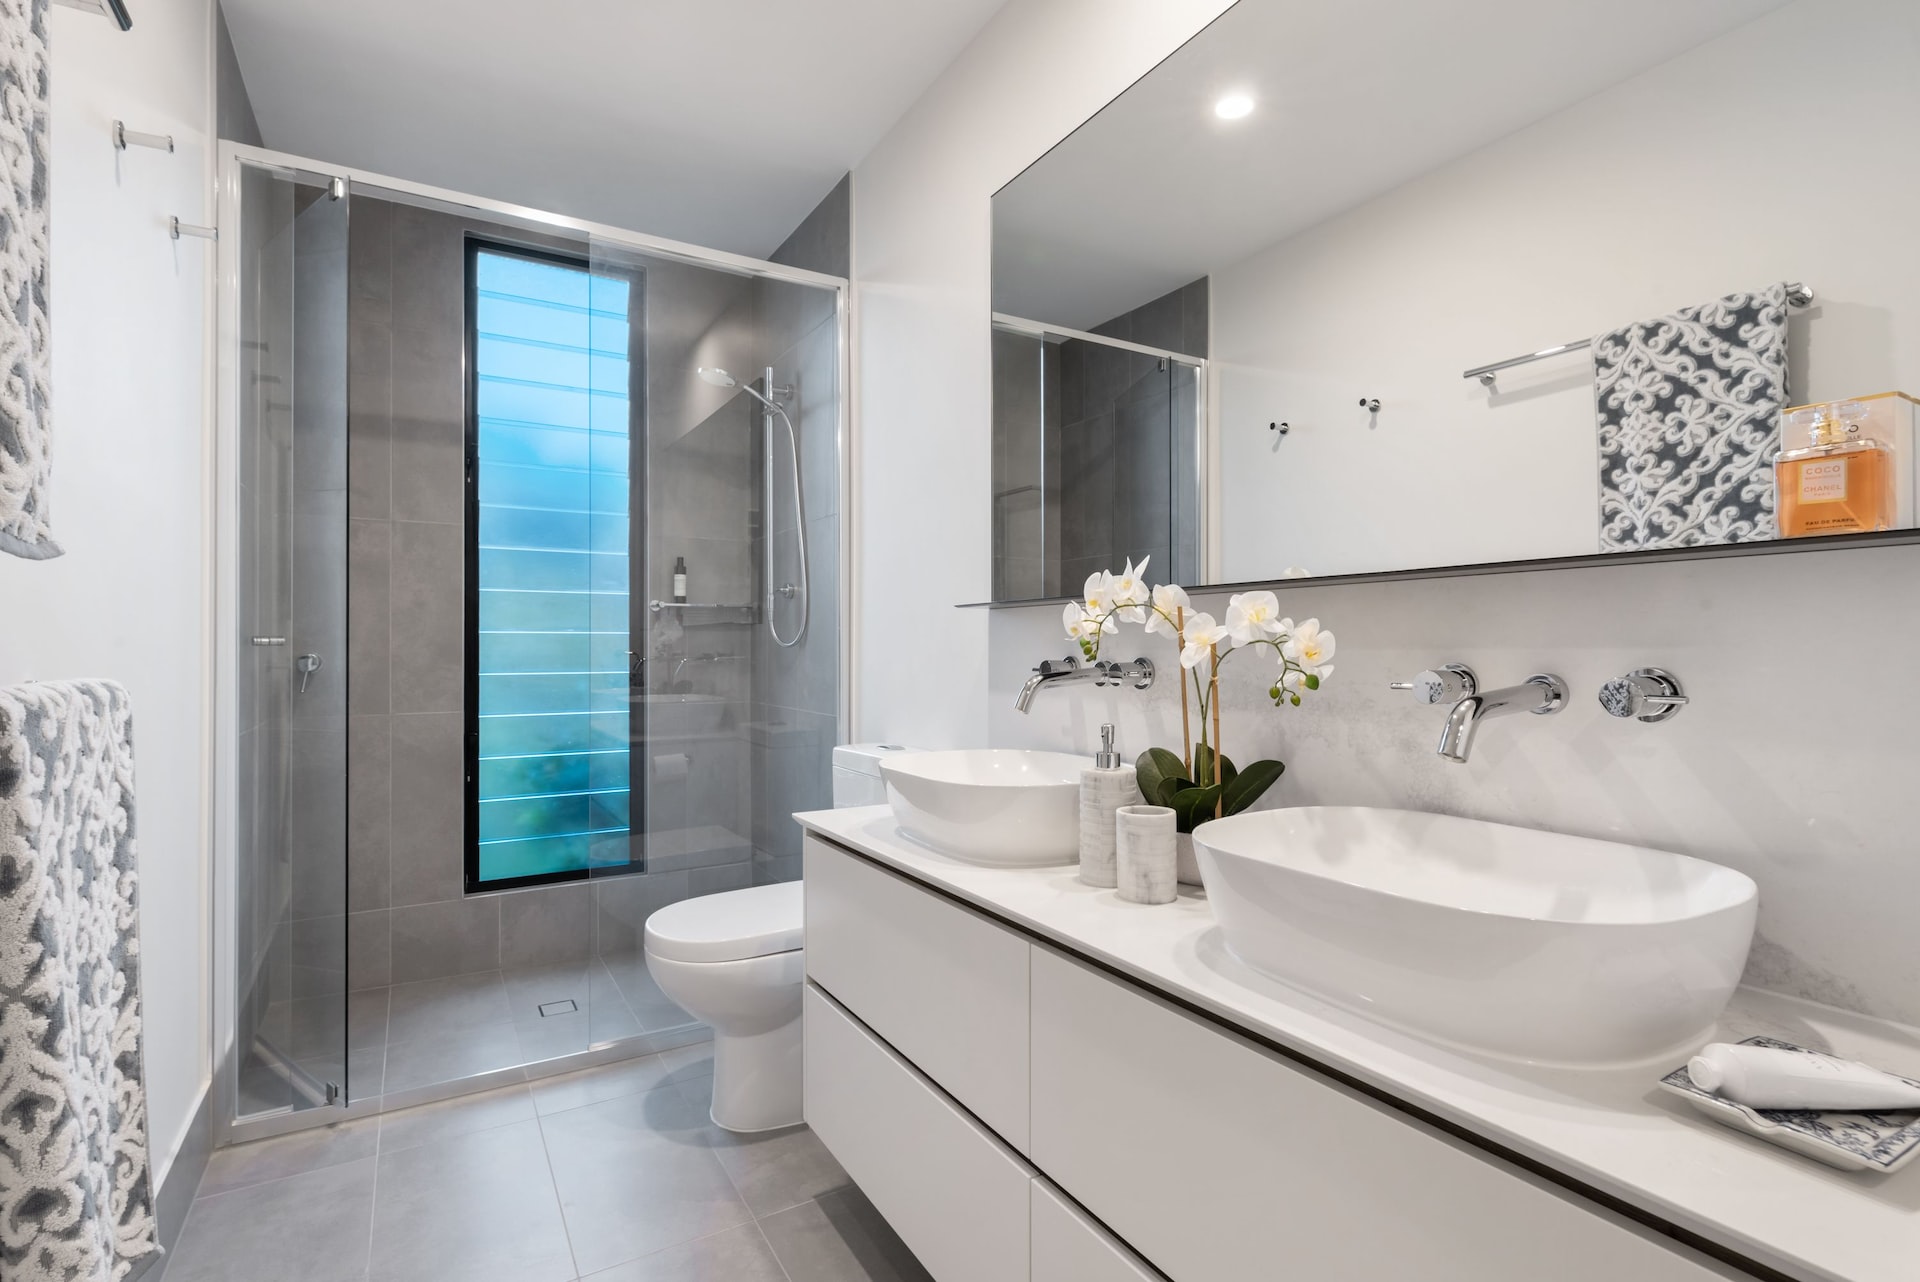 How Does Bathroom Remodeling Impact Home Value?